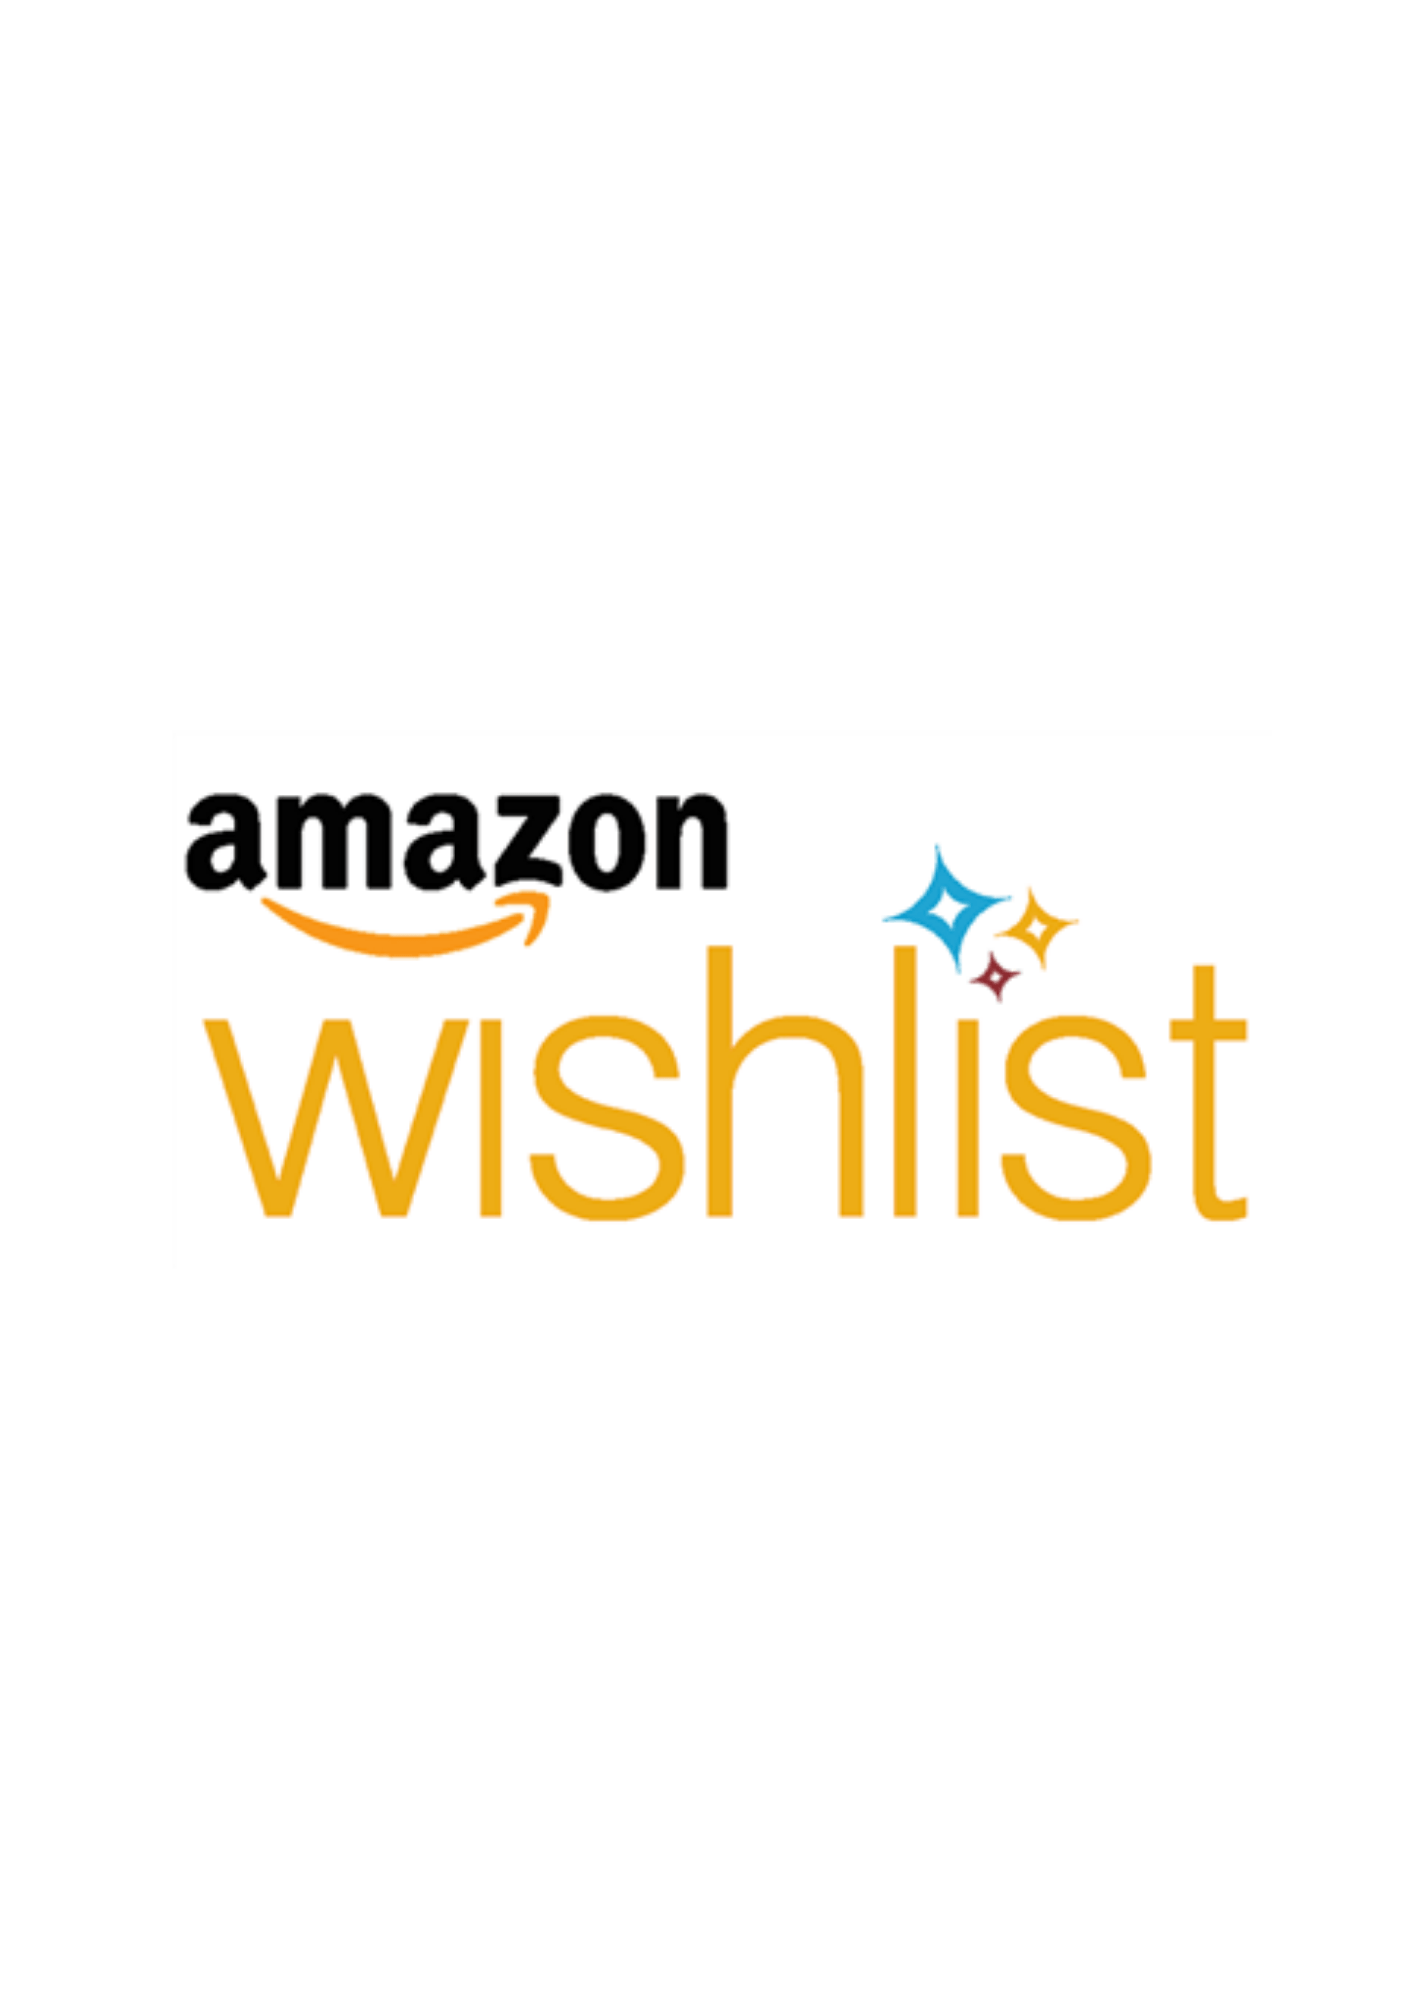 If you would like to purchase an item that we are in need of, please click here to visit our Amazon gift list.